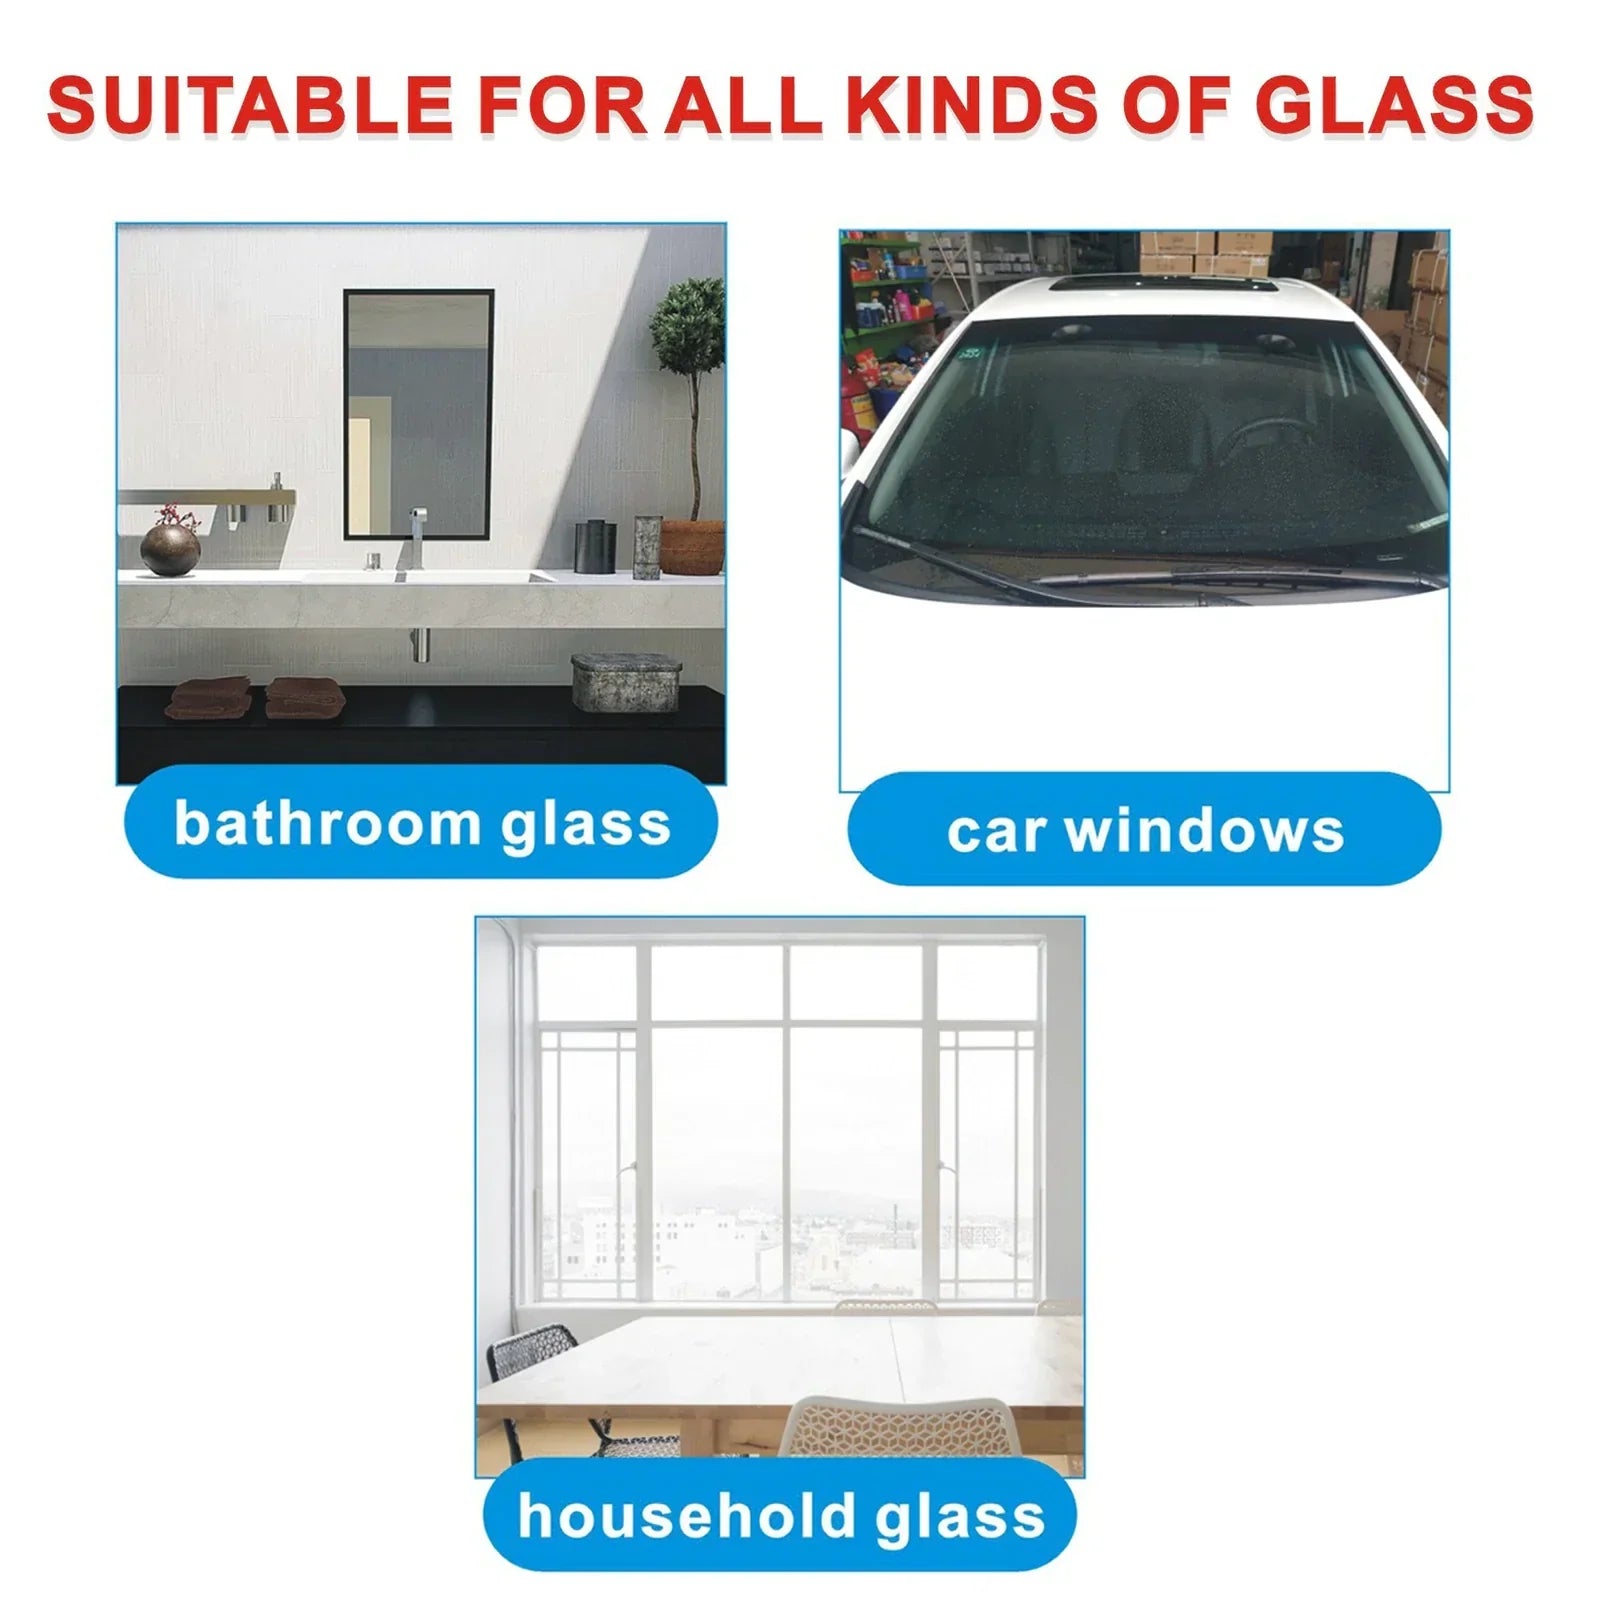 Car Glass Oil Film Cleaner - Safety and Long-term Protection